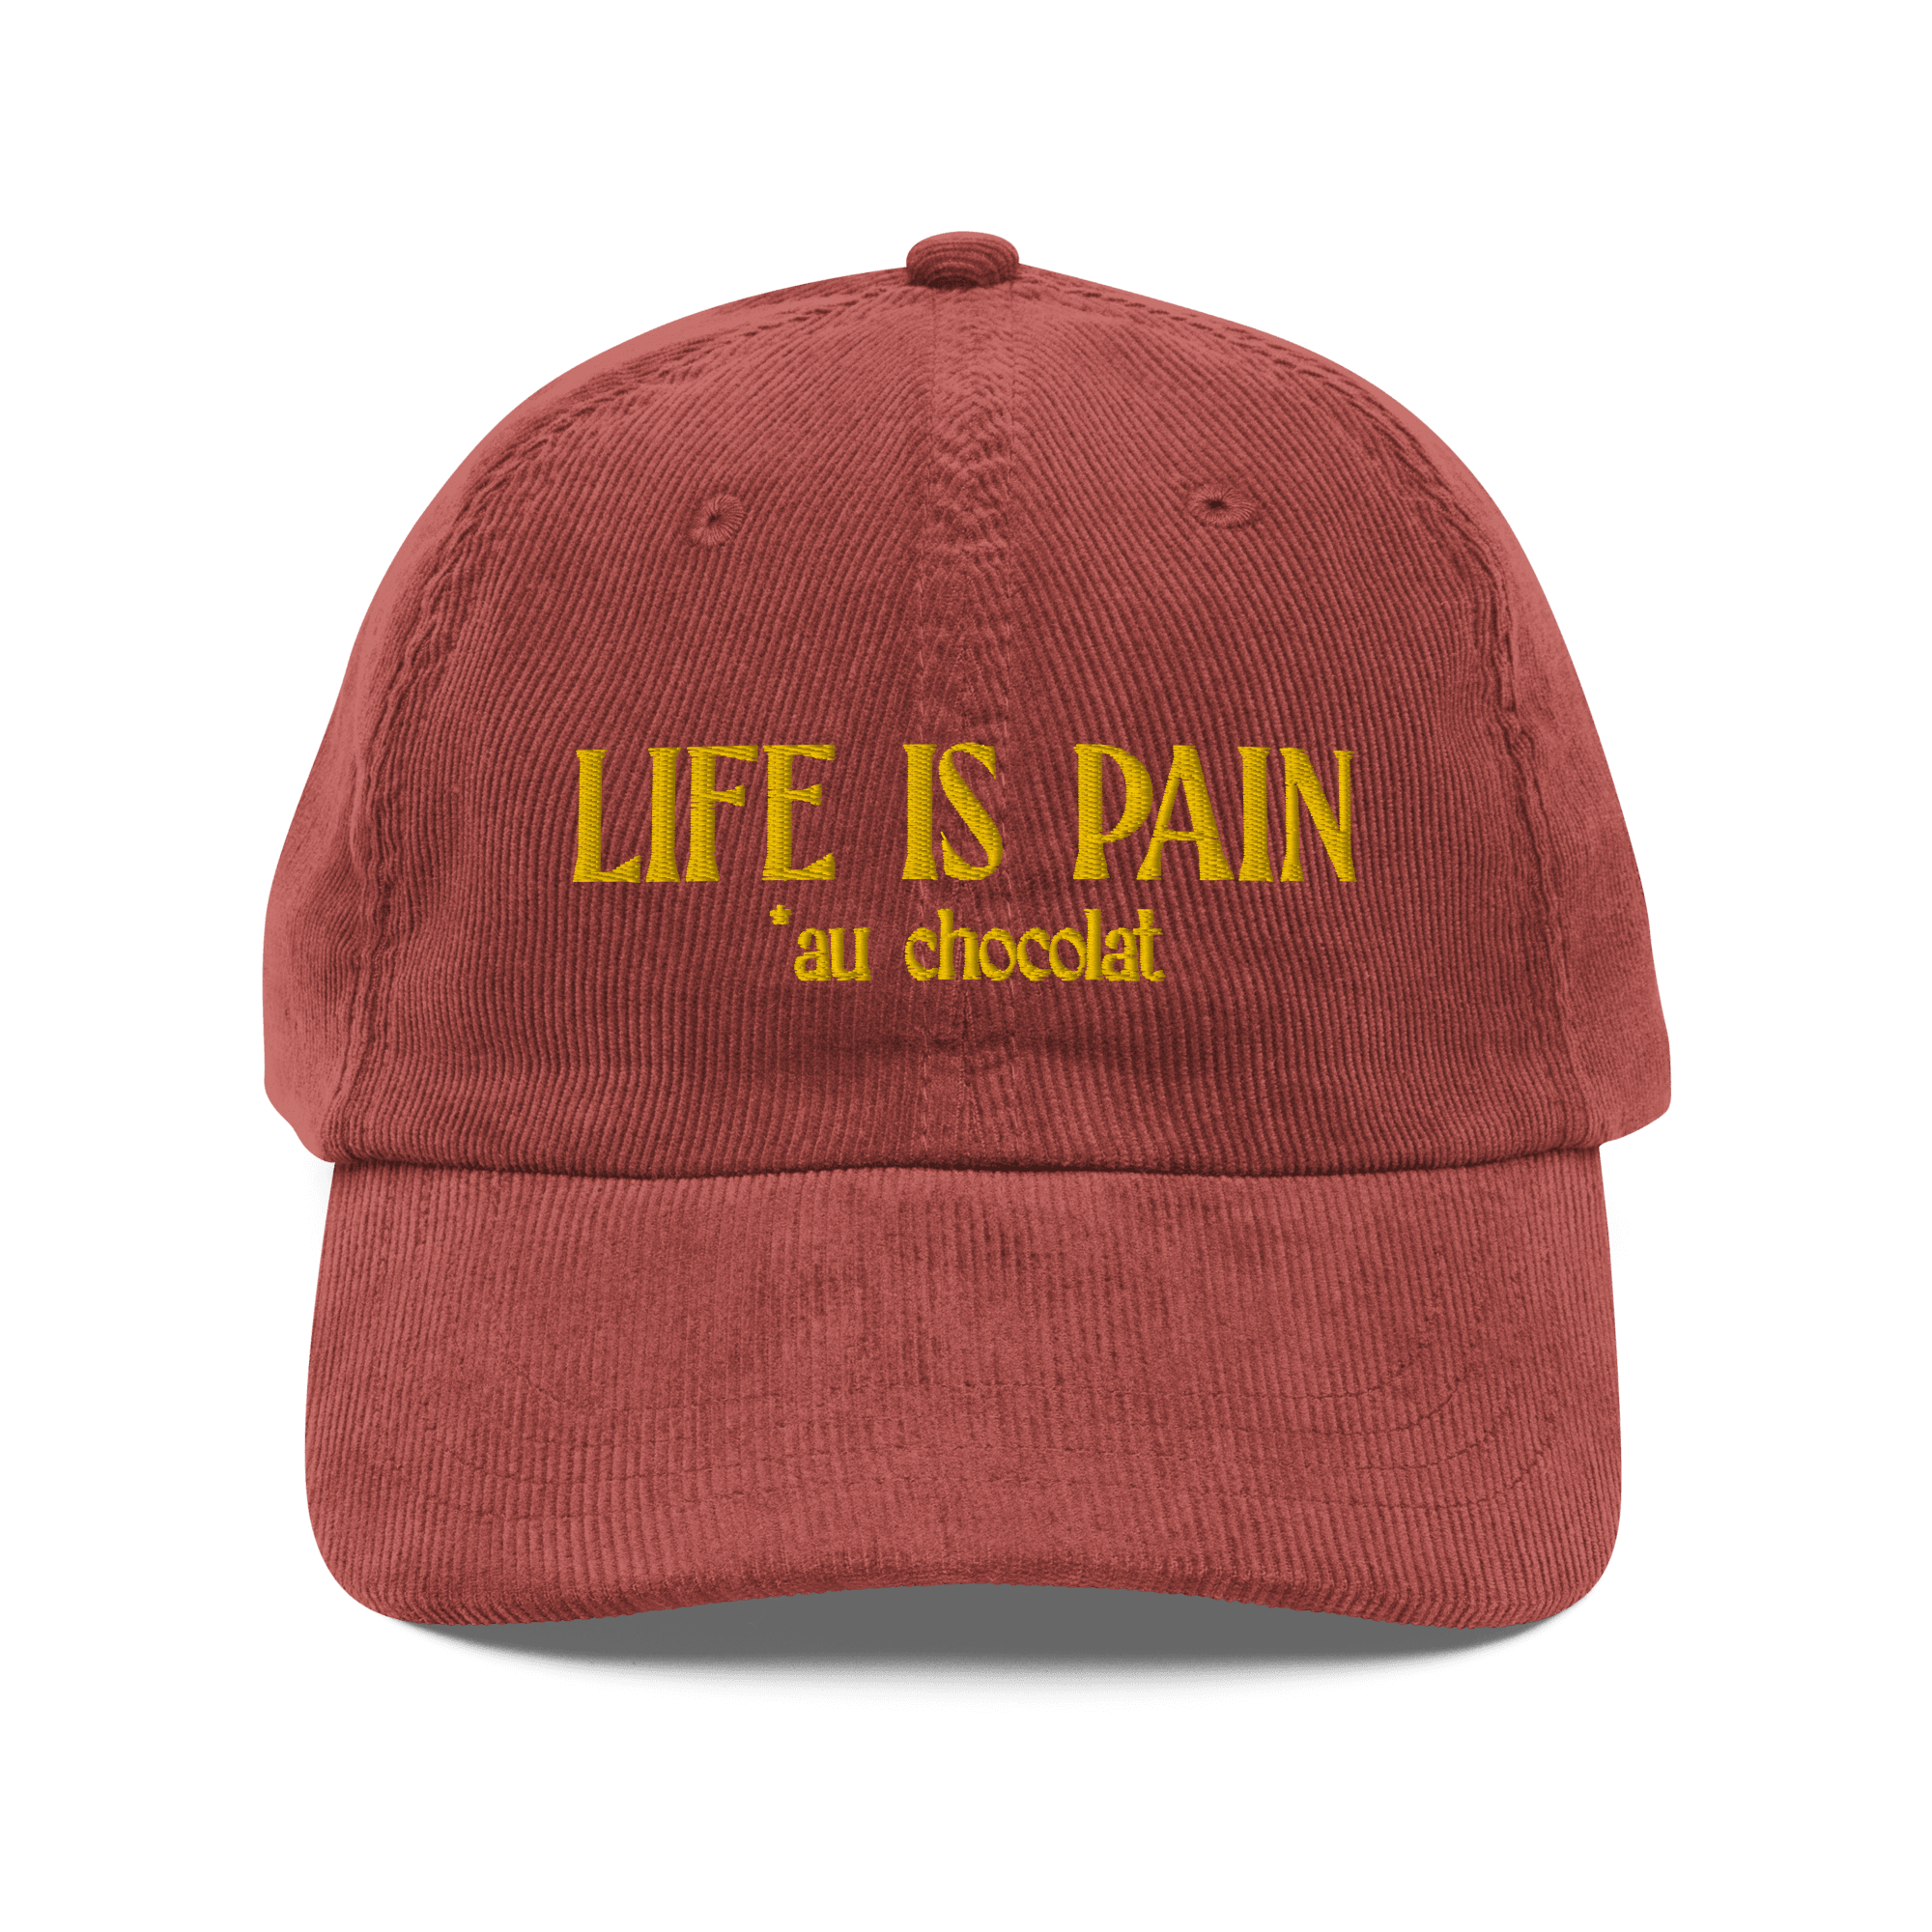 Life Is Pain (AU Chocolat) Embroidered Hat Burgundy